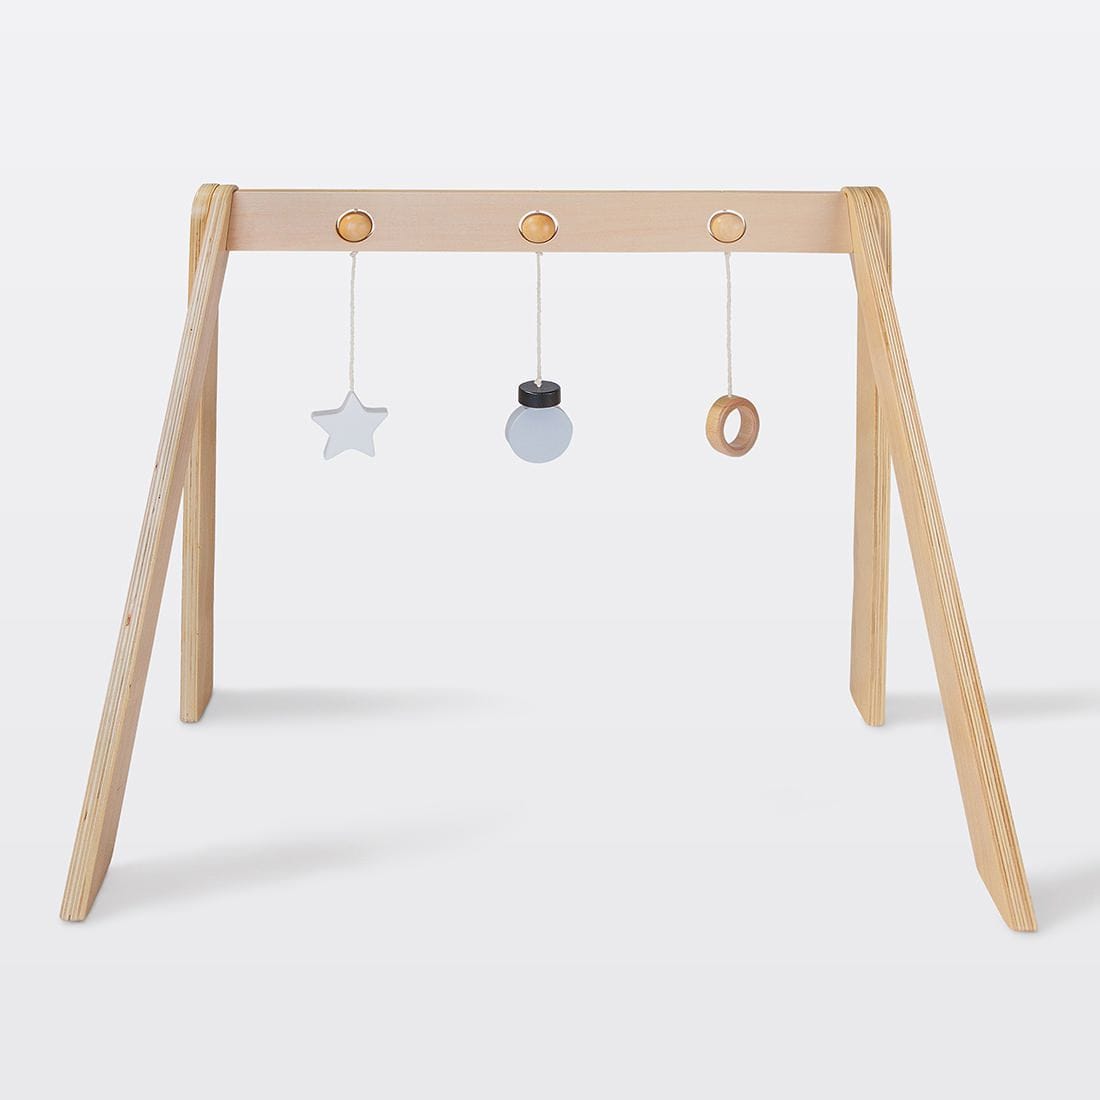 wooden play gym target